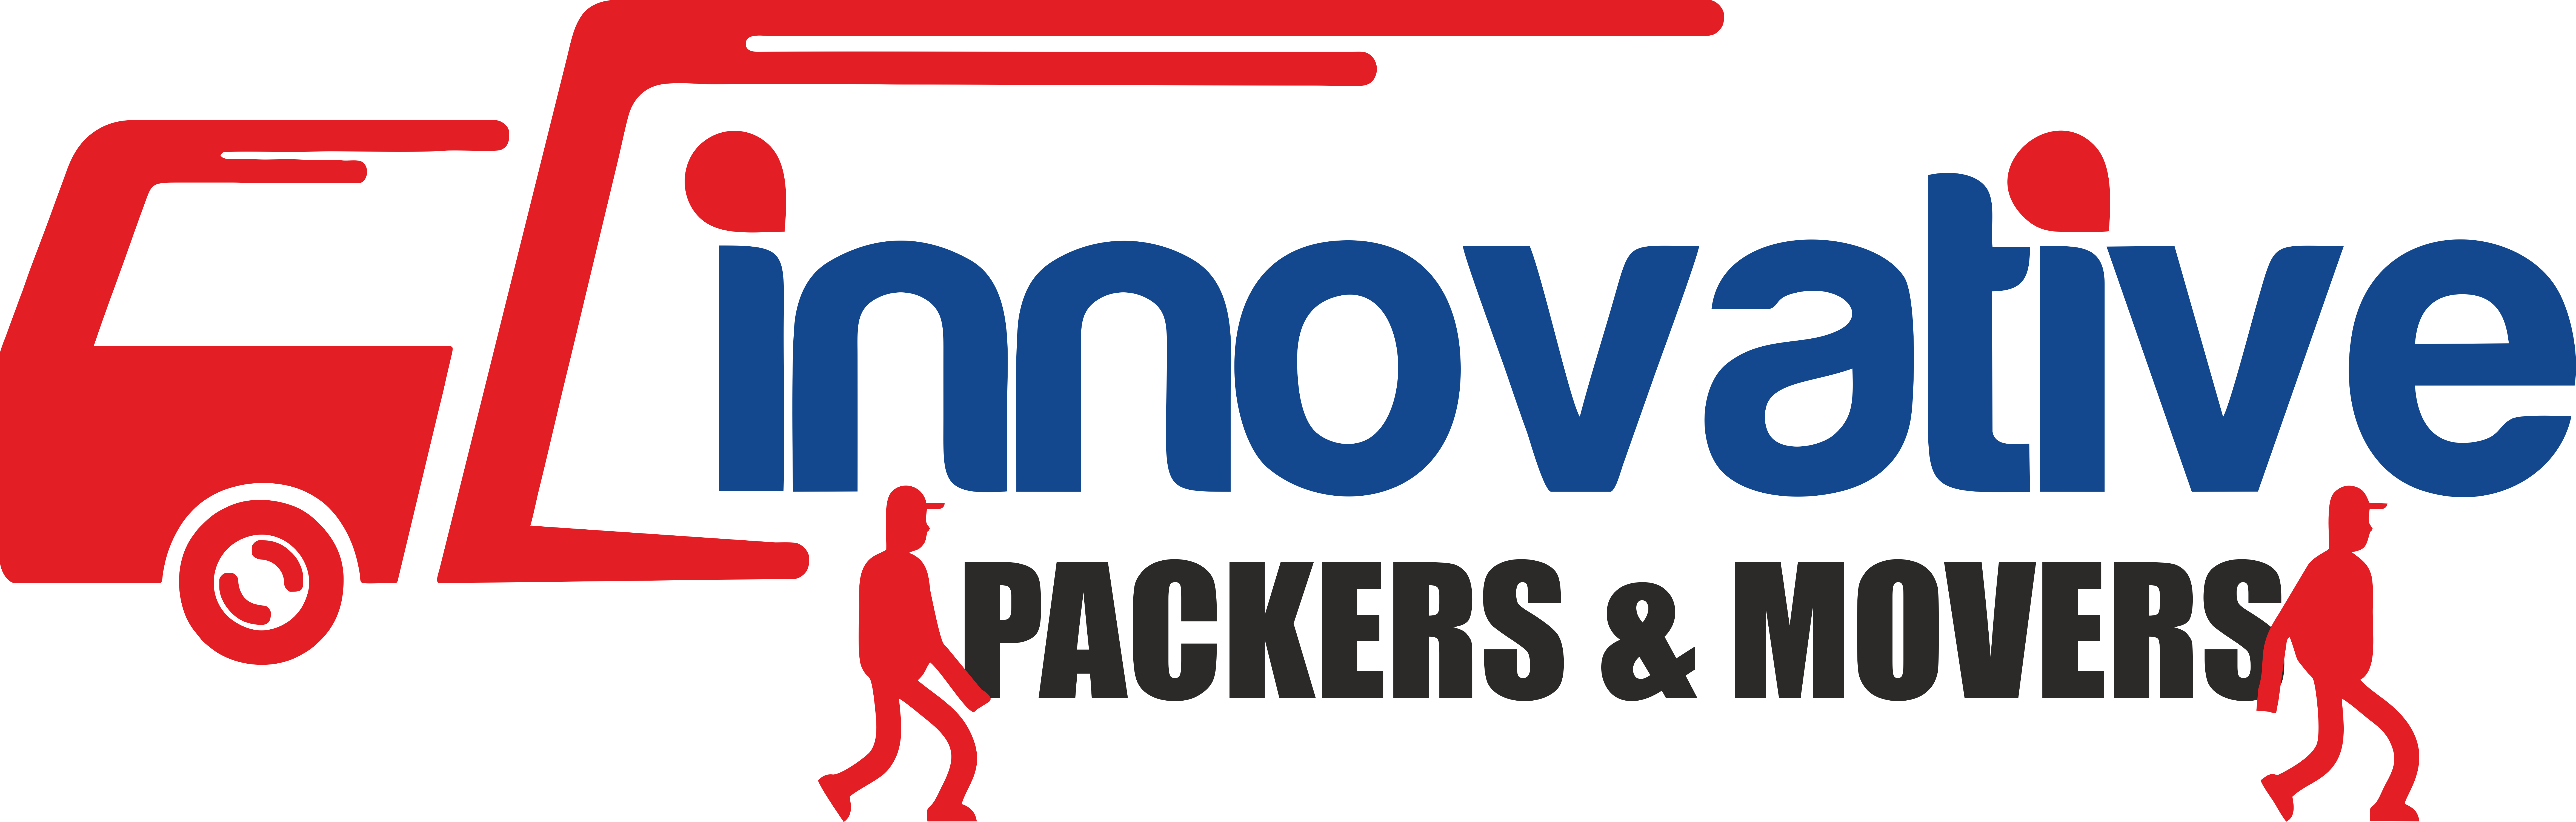 Packer Mover Feedsfloor - Packers And Movers Guwahati Png,Packers Logo Png  - free transparent png images - pngaaa.com